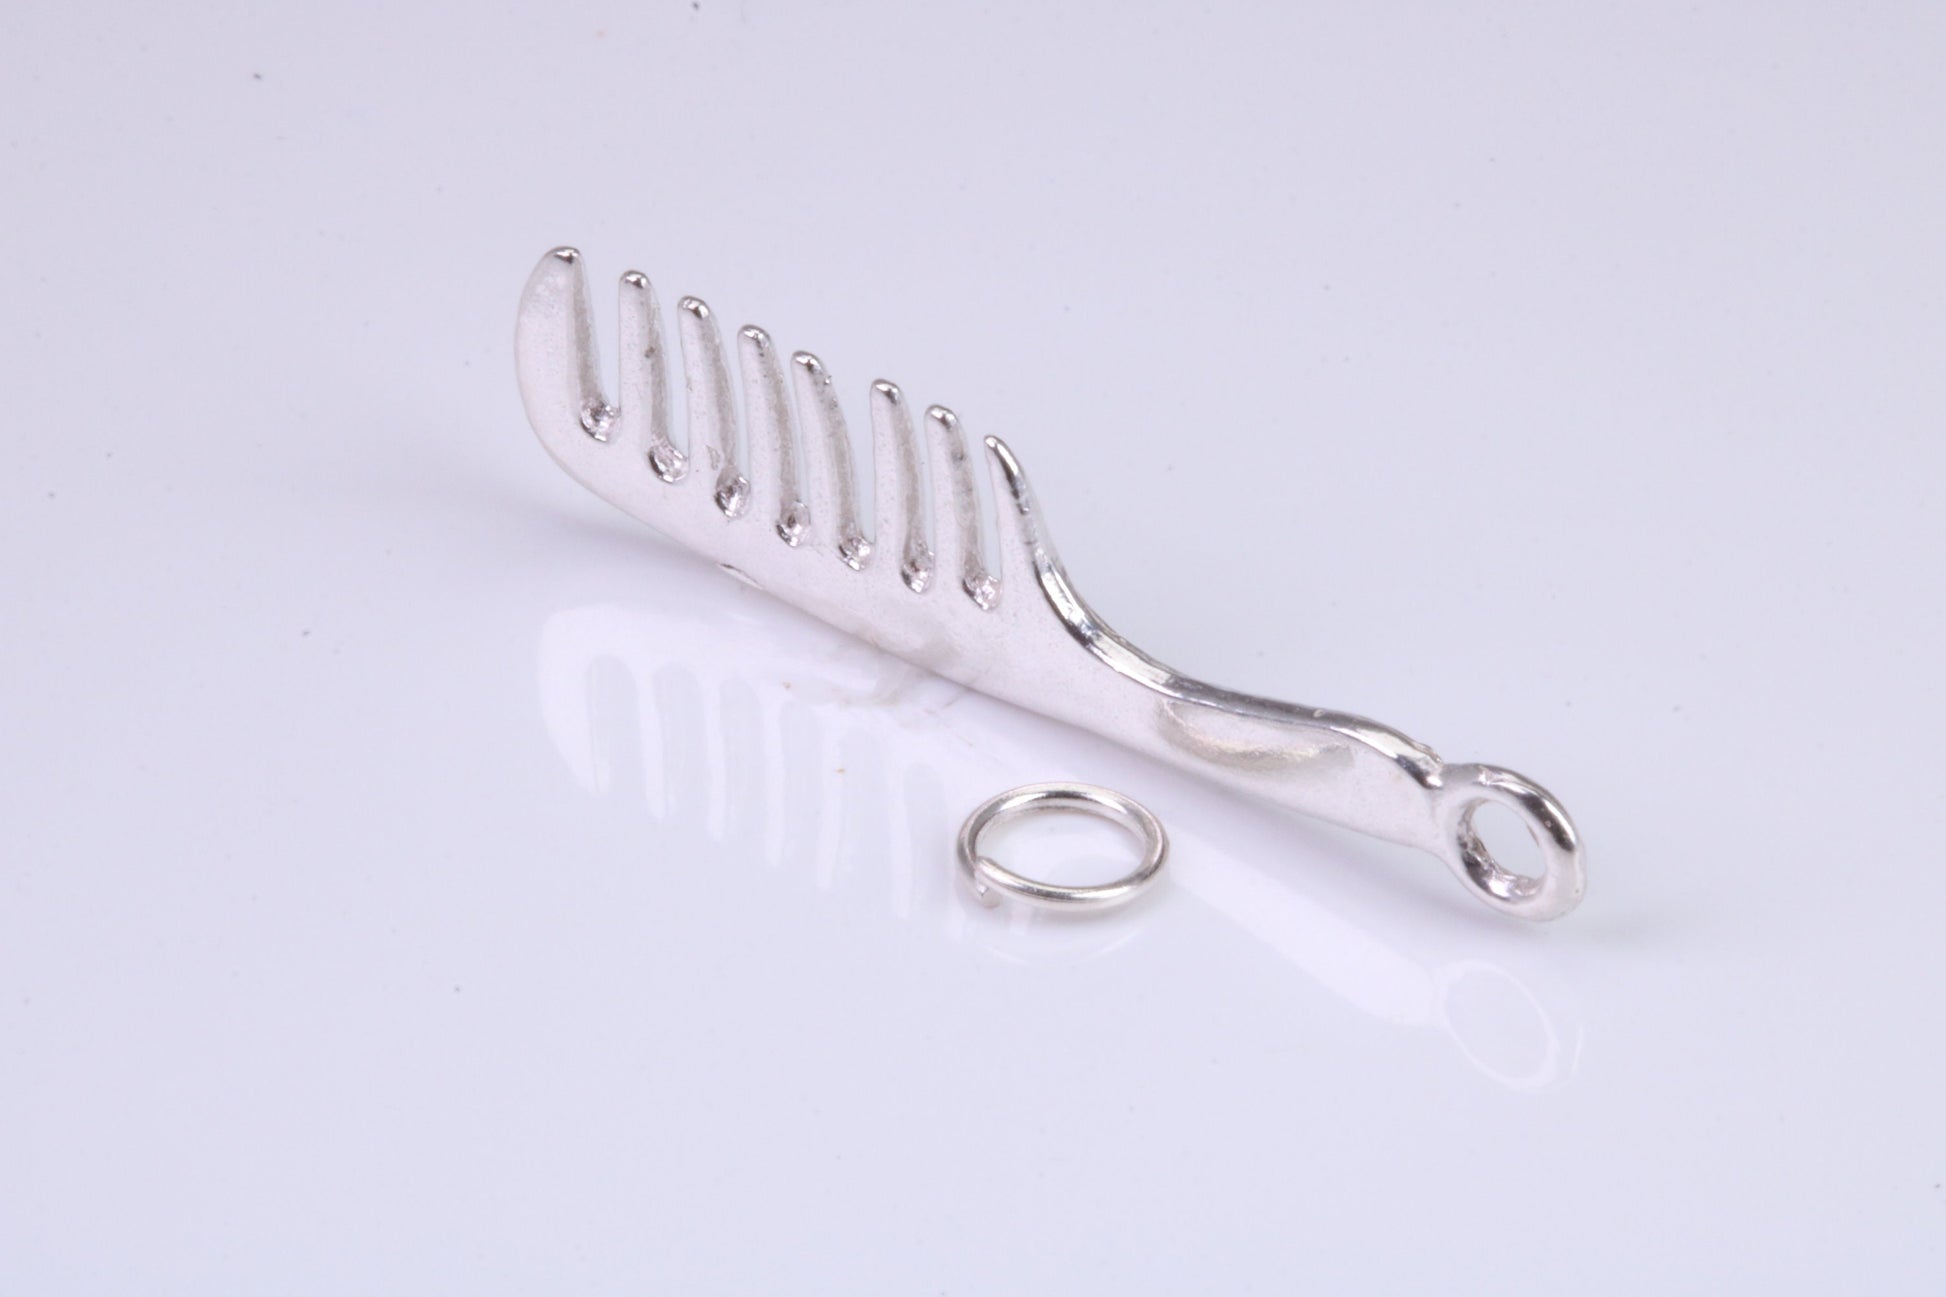 Large Hair Comb Charm, Traditional Charm, Made from Solid 925 Grade Sterling Silver, Complete with Attachment Link